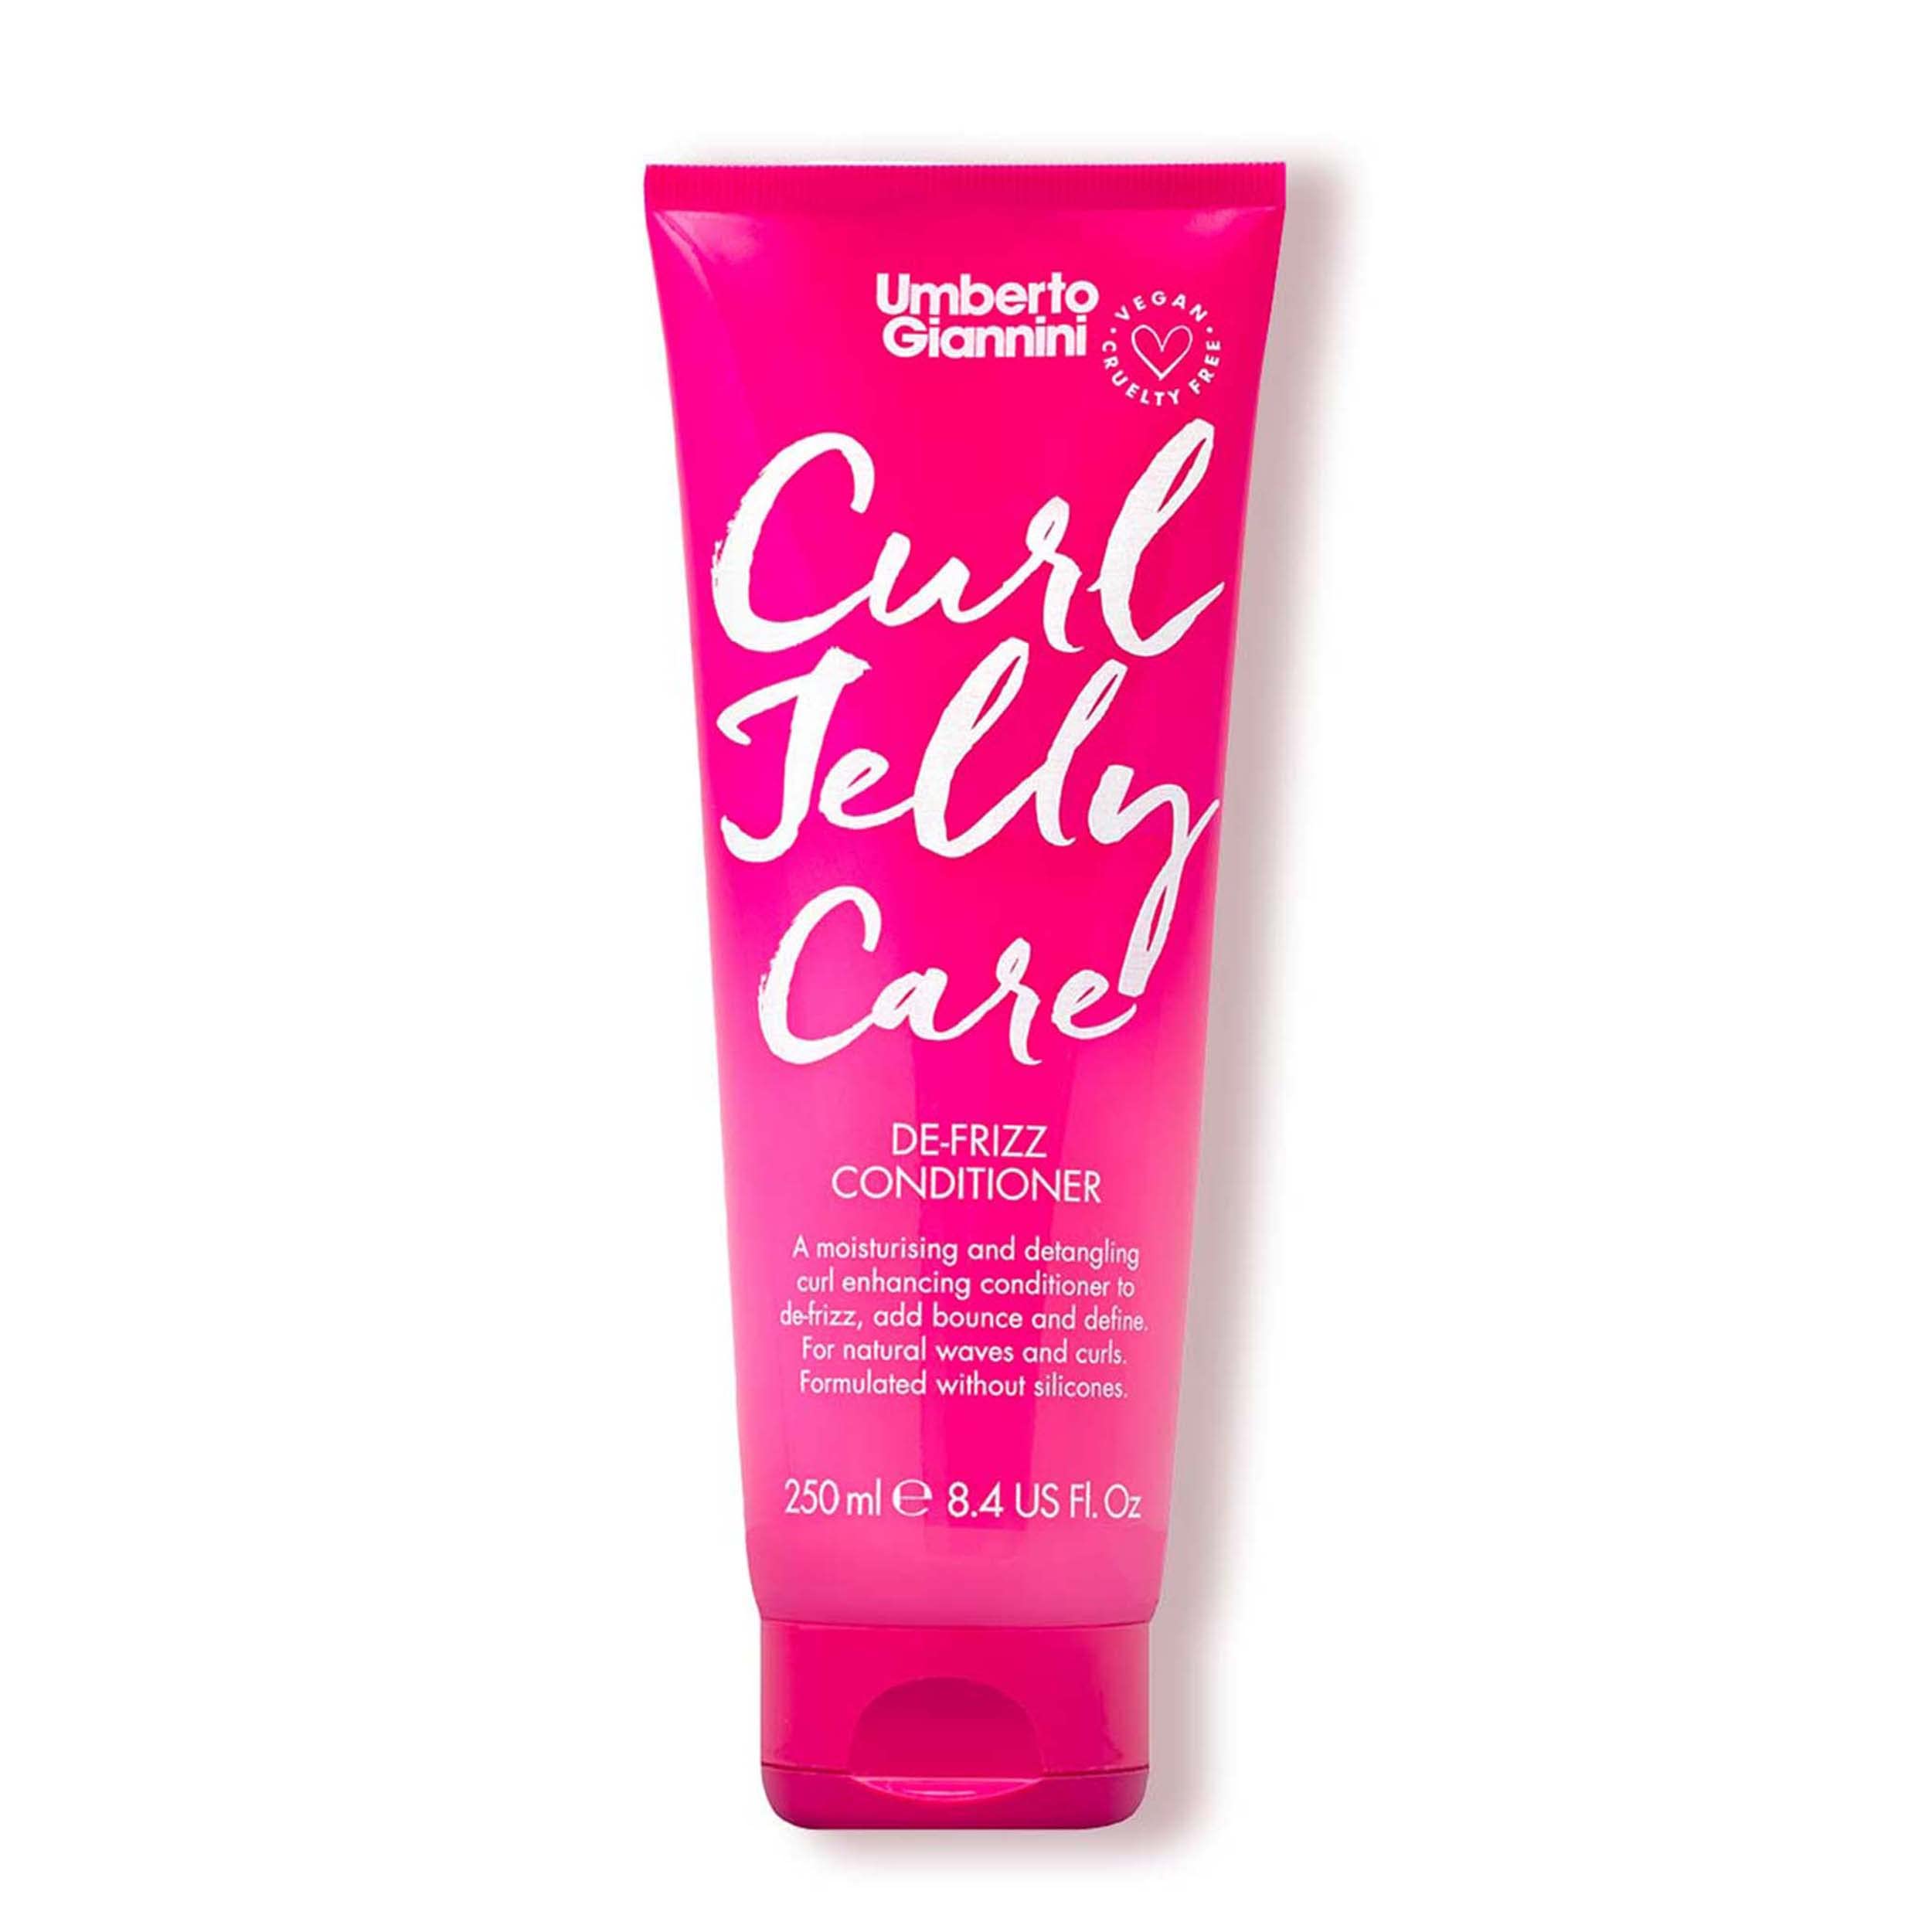 Umberto Giannini Curl Jelly Care, Vegan & Cruelty Free De-Frizz Conditioner for Curly or Wavy Hair, 250 ml